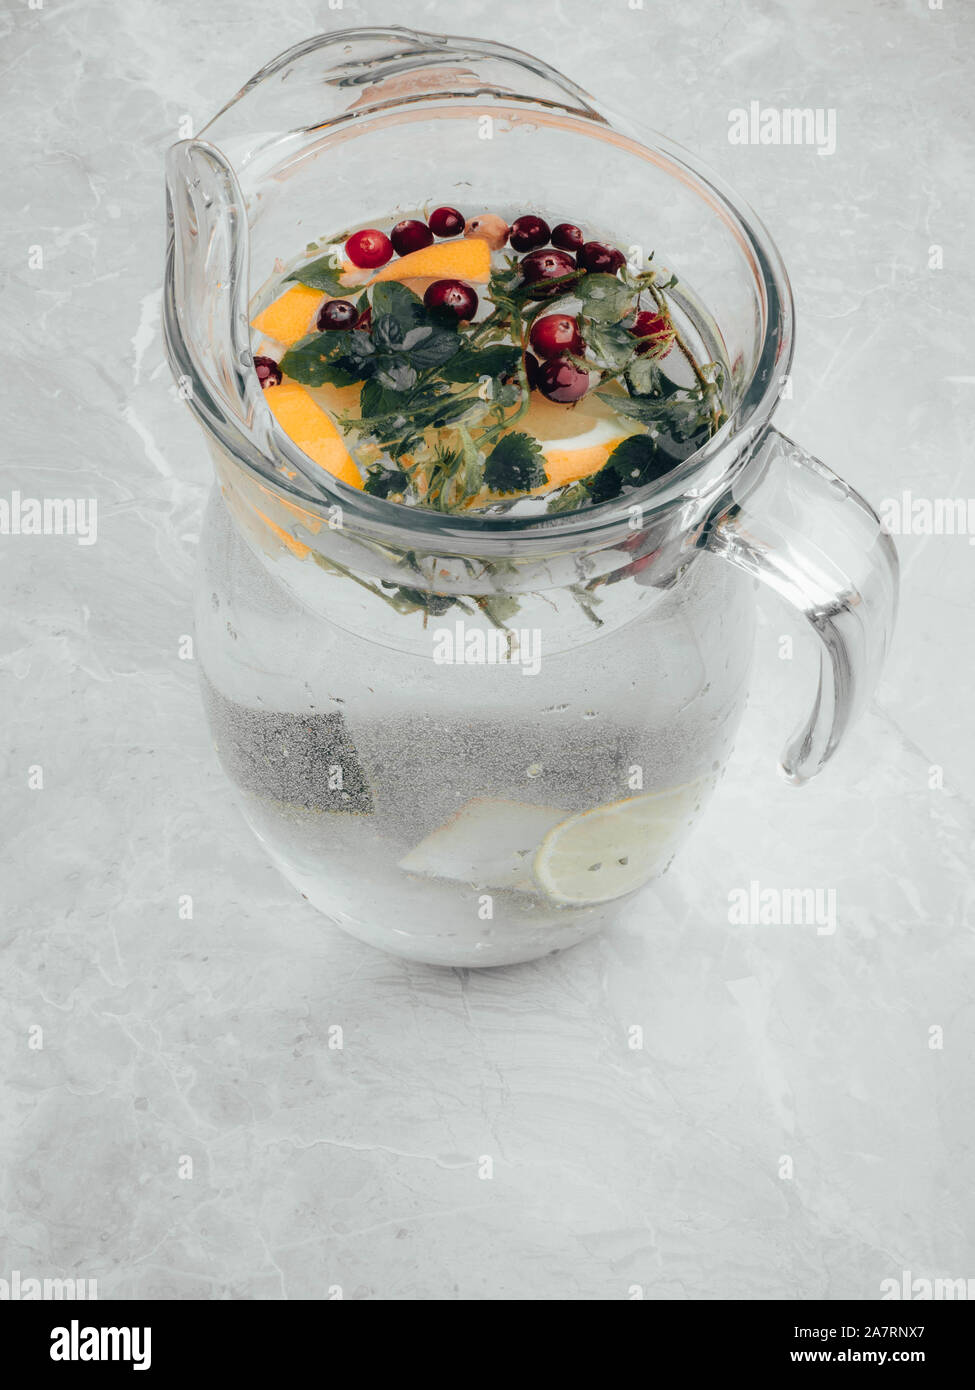 https://c8.alamy.com/comp/2A7RNX7/lemonade-pitcher-with-lemon-slices-mint-leaves-red-berries-and-ice-on-glass-jug-view-with-copy-space-2A7RNX7.jpg